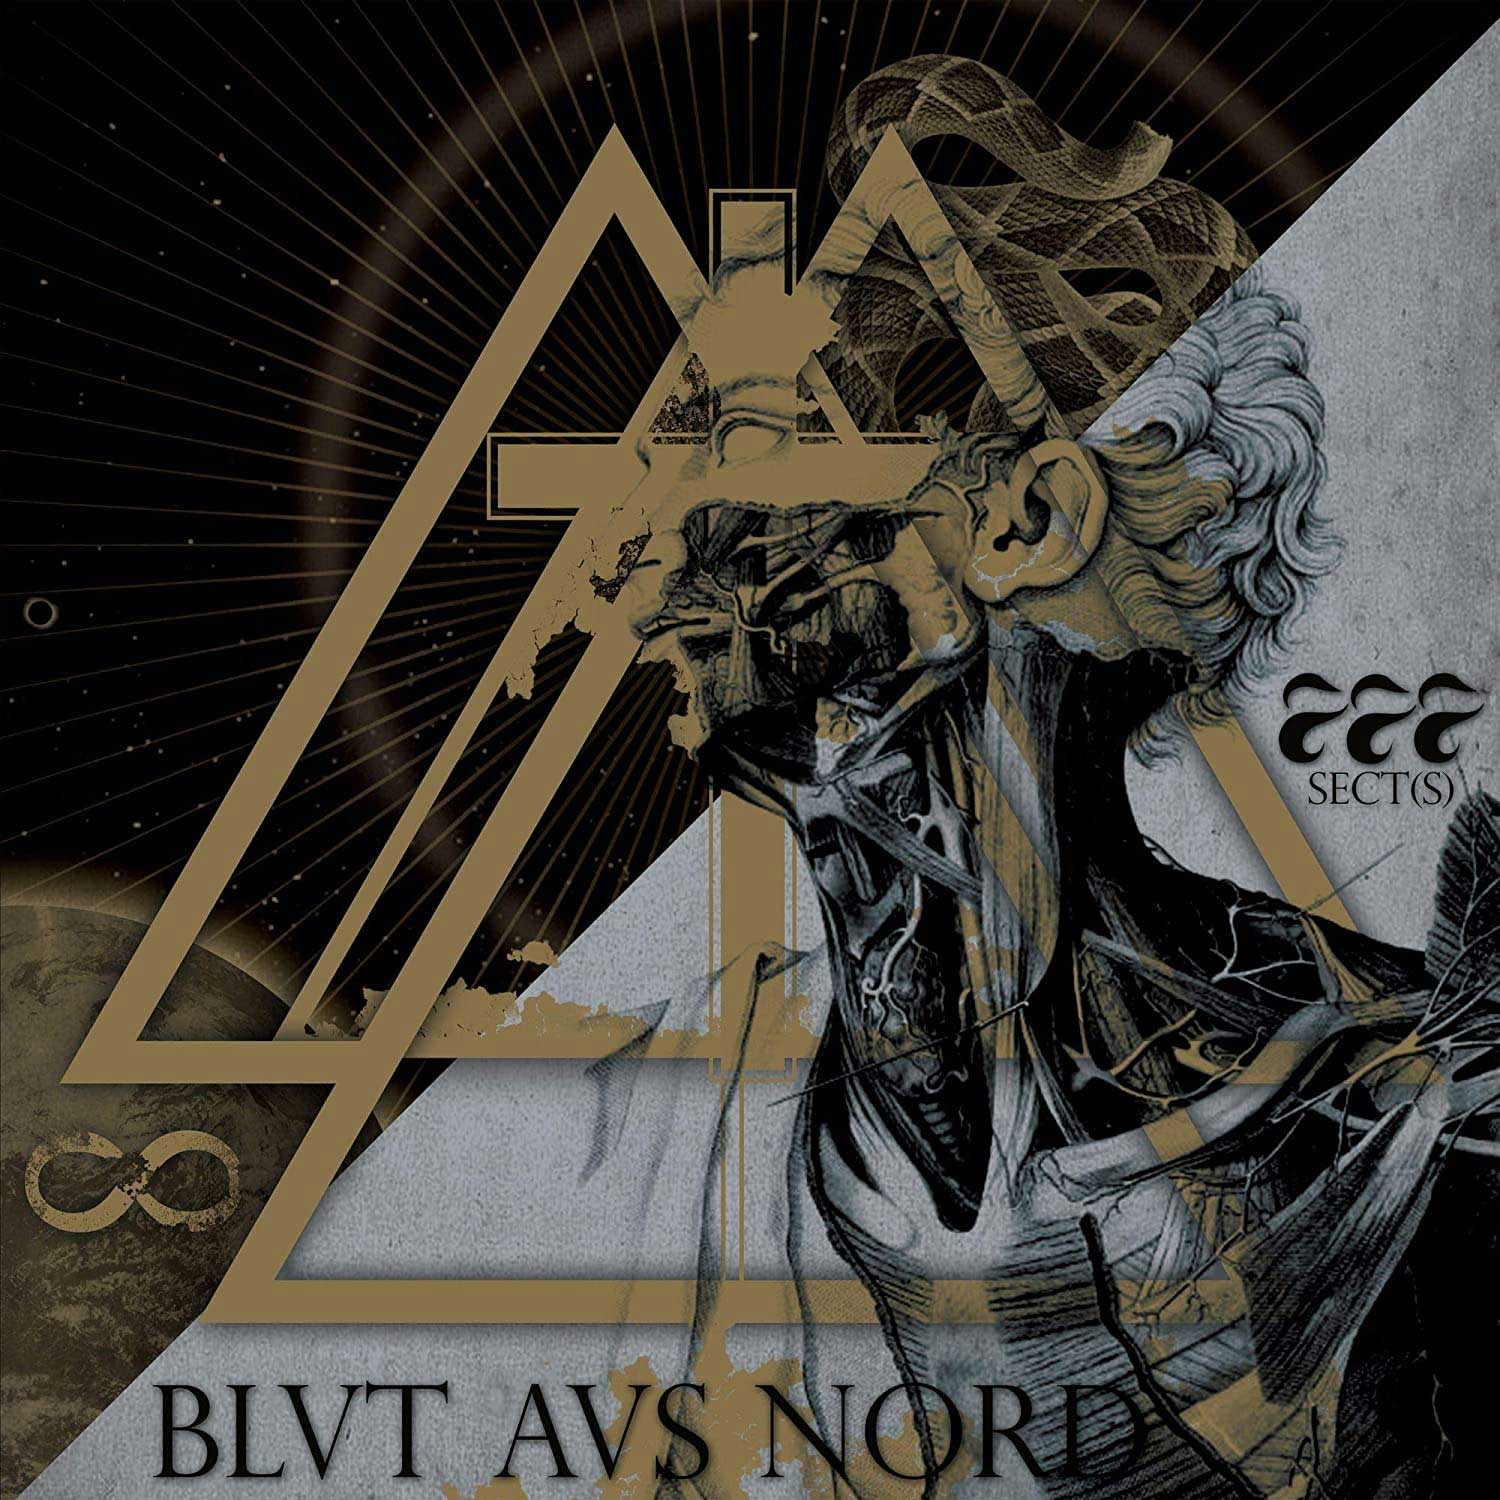 Blut Aus Nord - 777 Sect(s)